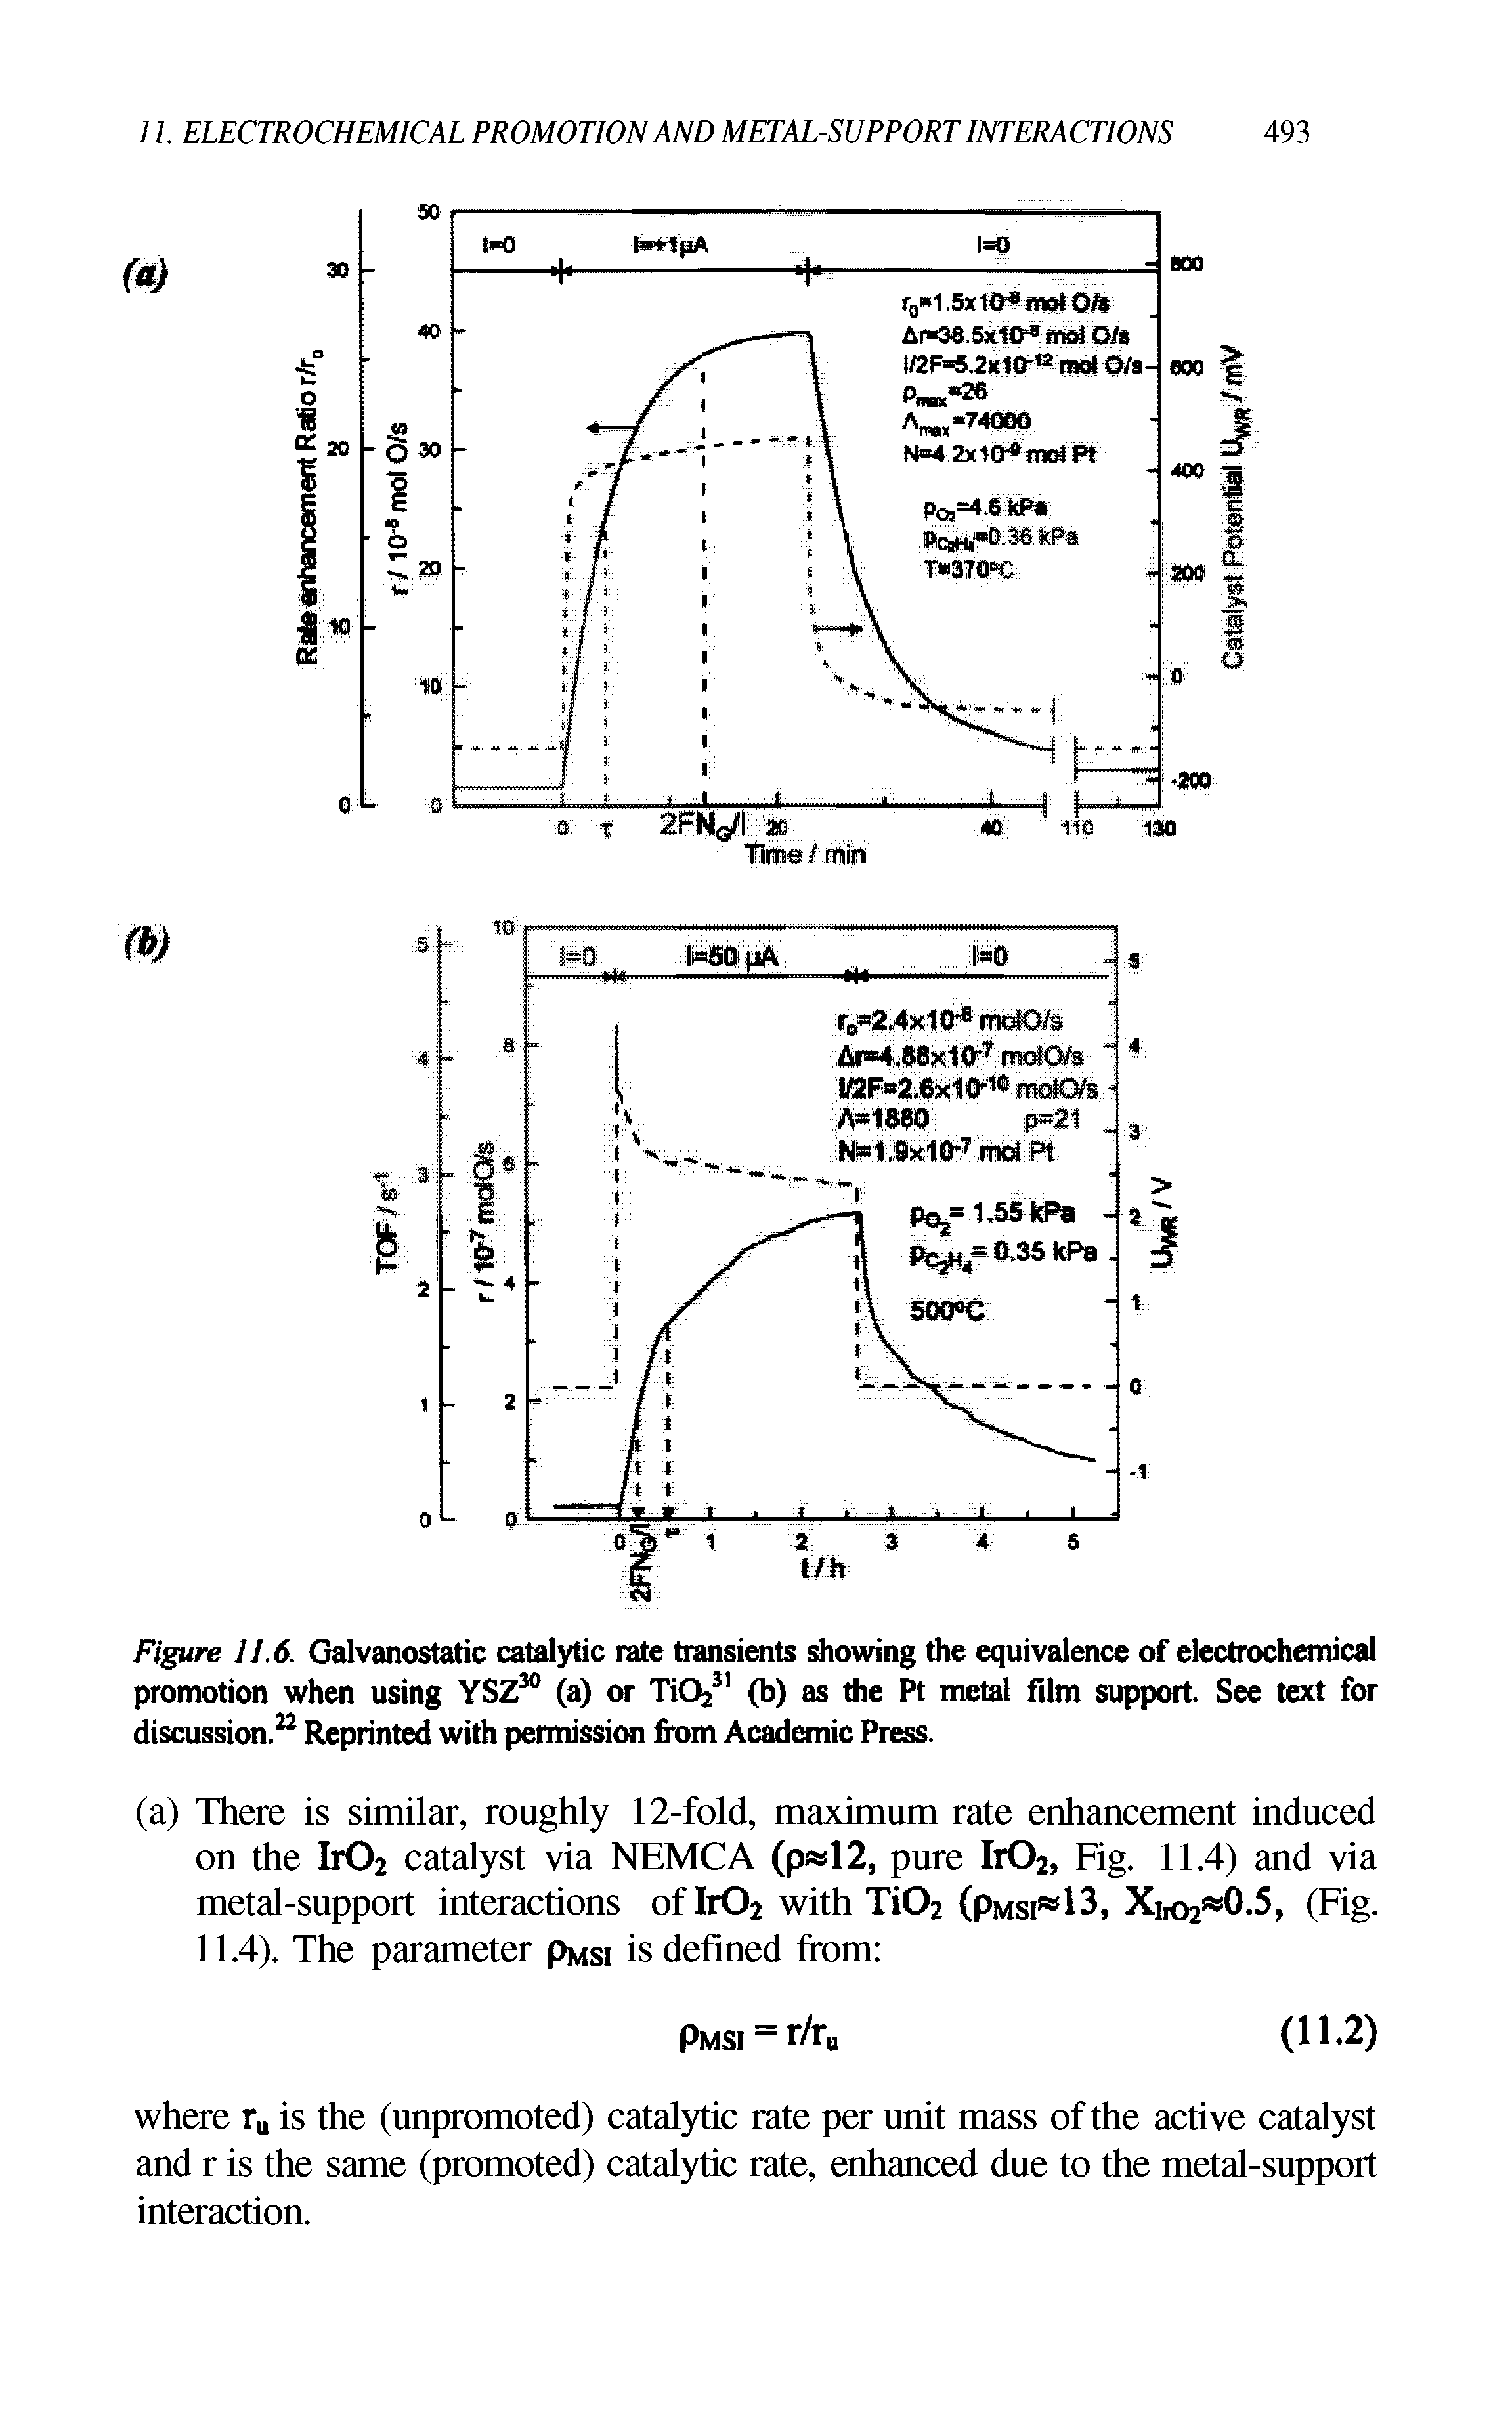 Figure 11.6. Galvanostatic catalytic rate transients showing the equivalence of electrochemical promotion when using YSZ30 (a) or TiOj31 (b) as the Pt metal film support. See text for discussion.22 Reprinted with permission from Academic Press.